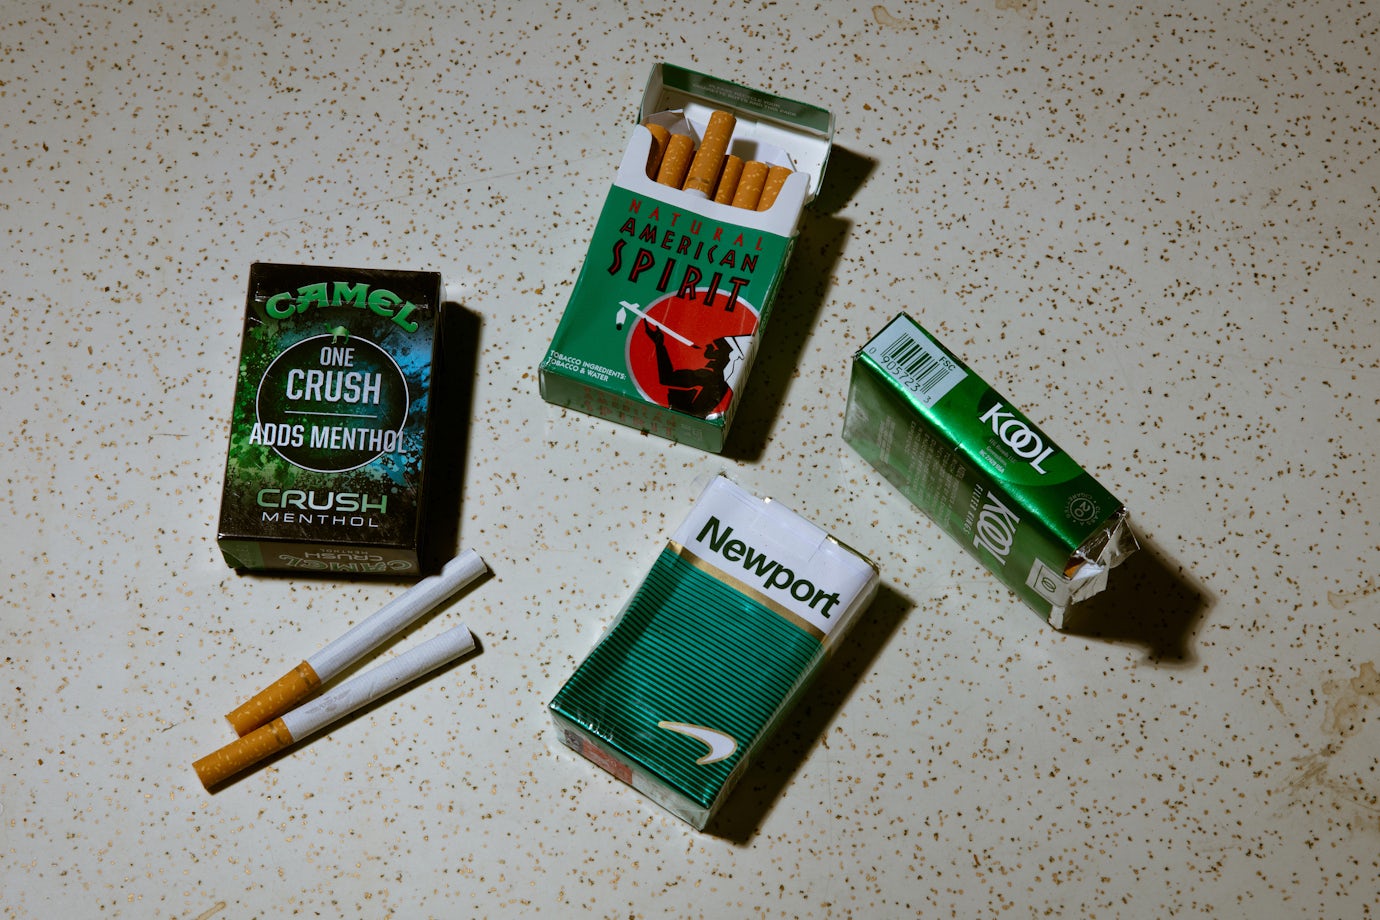 Packets of menthol cigarettes, different brands